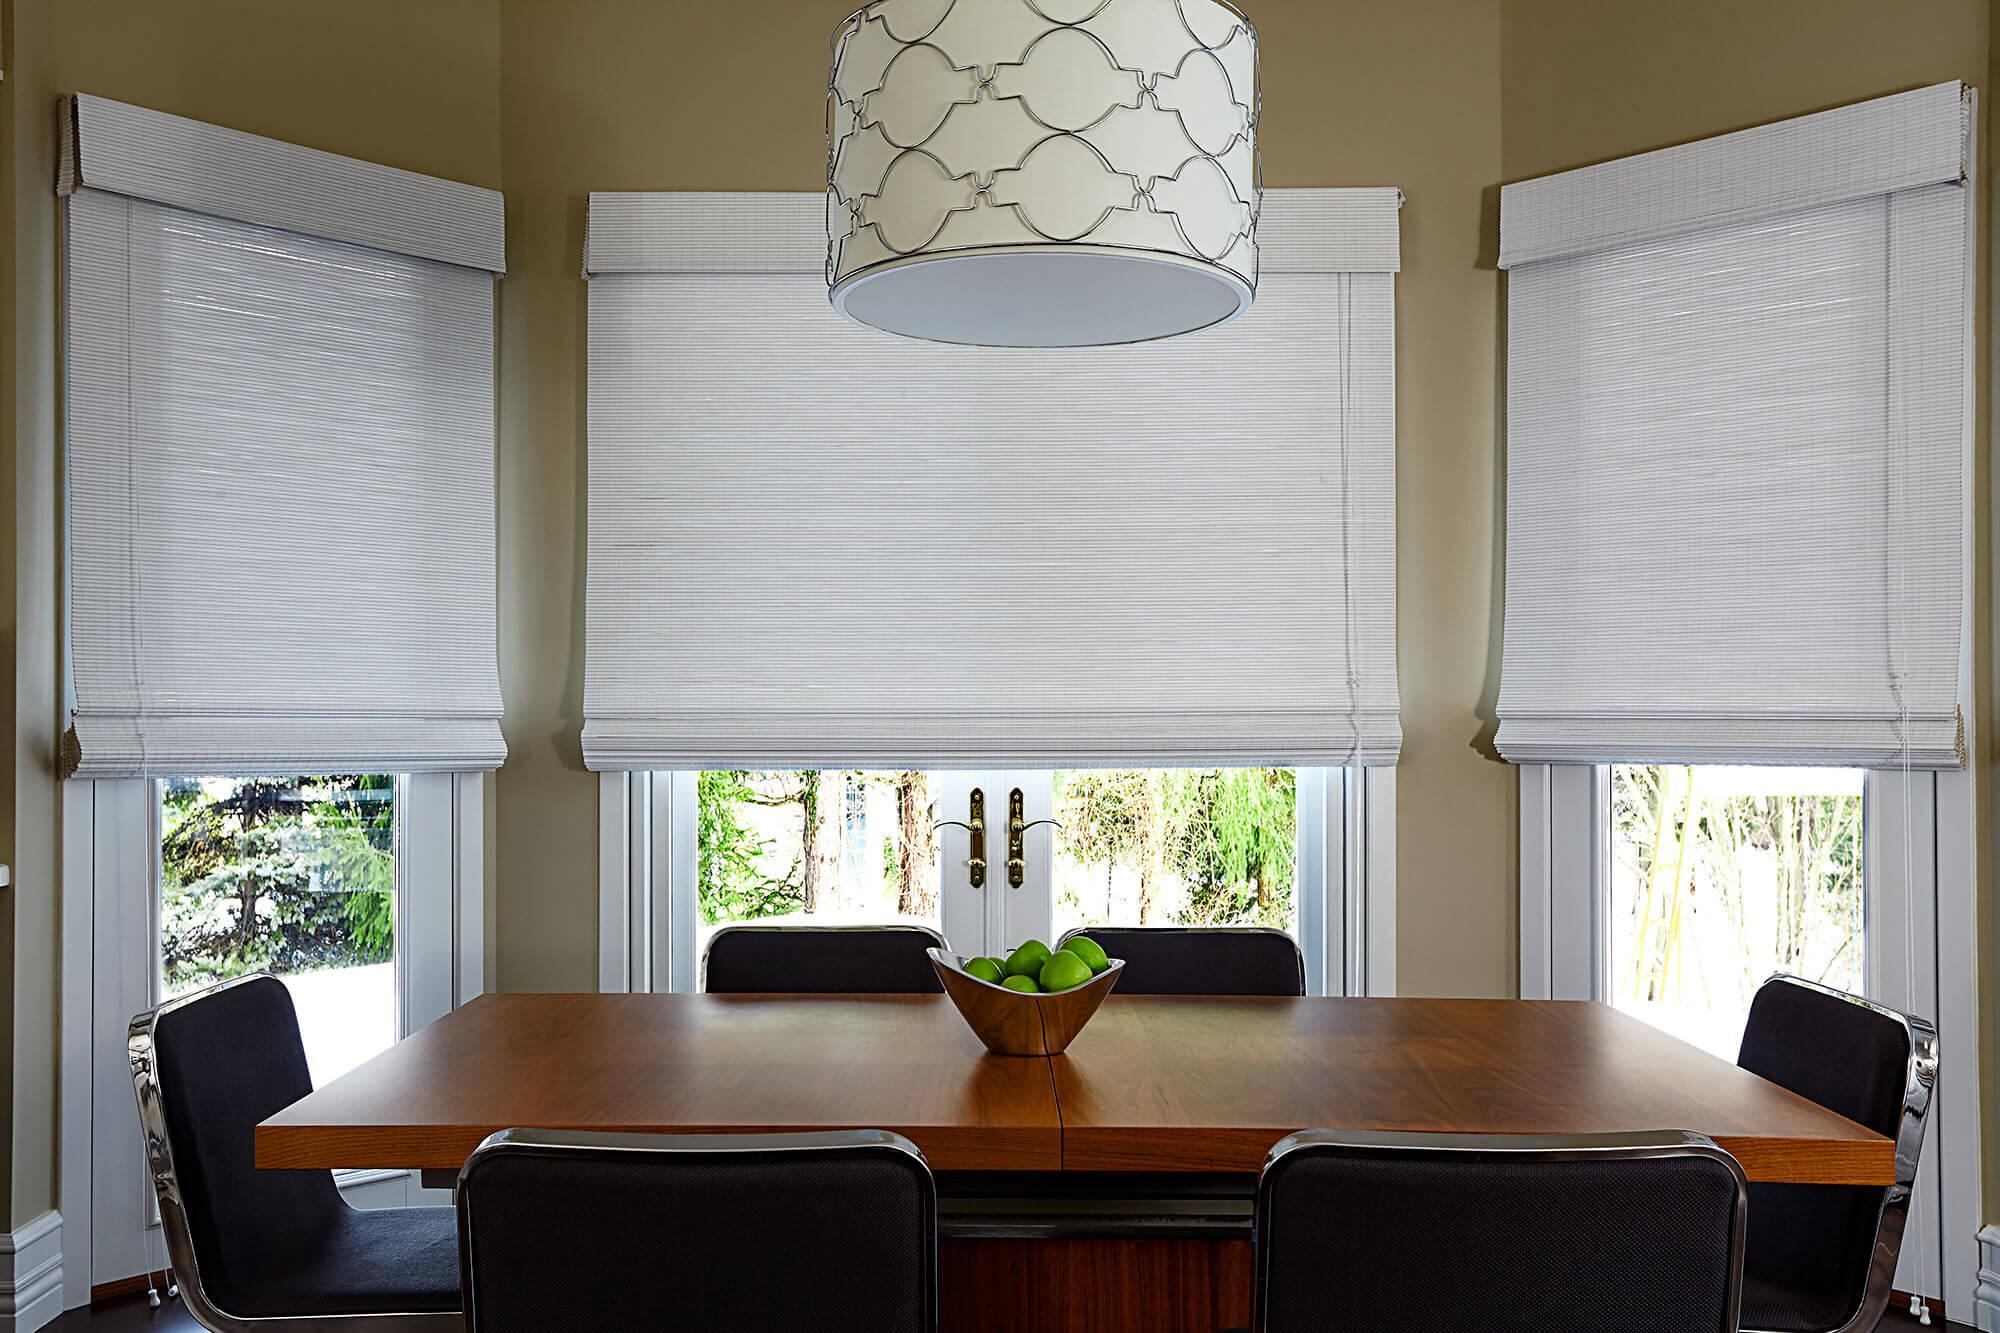 Dark brown woven wood shades sprucing up the breakfast nook. A simple yet elegant window treatment option from Blinds To Go